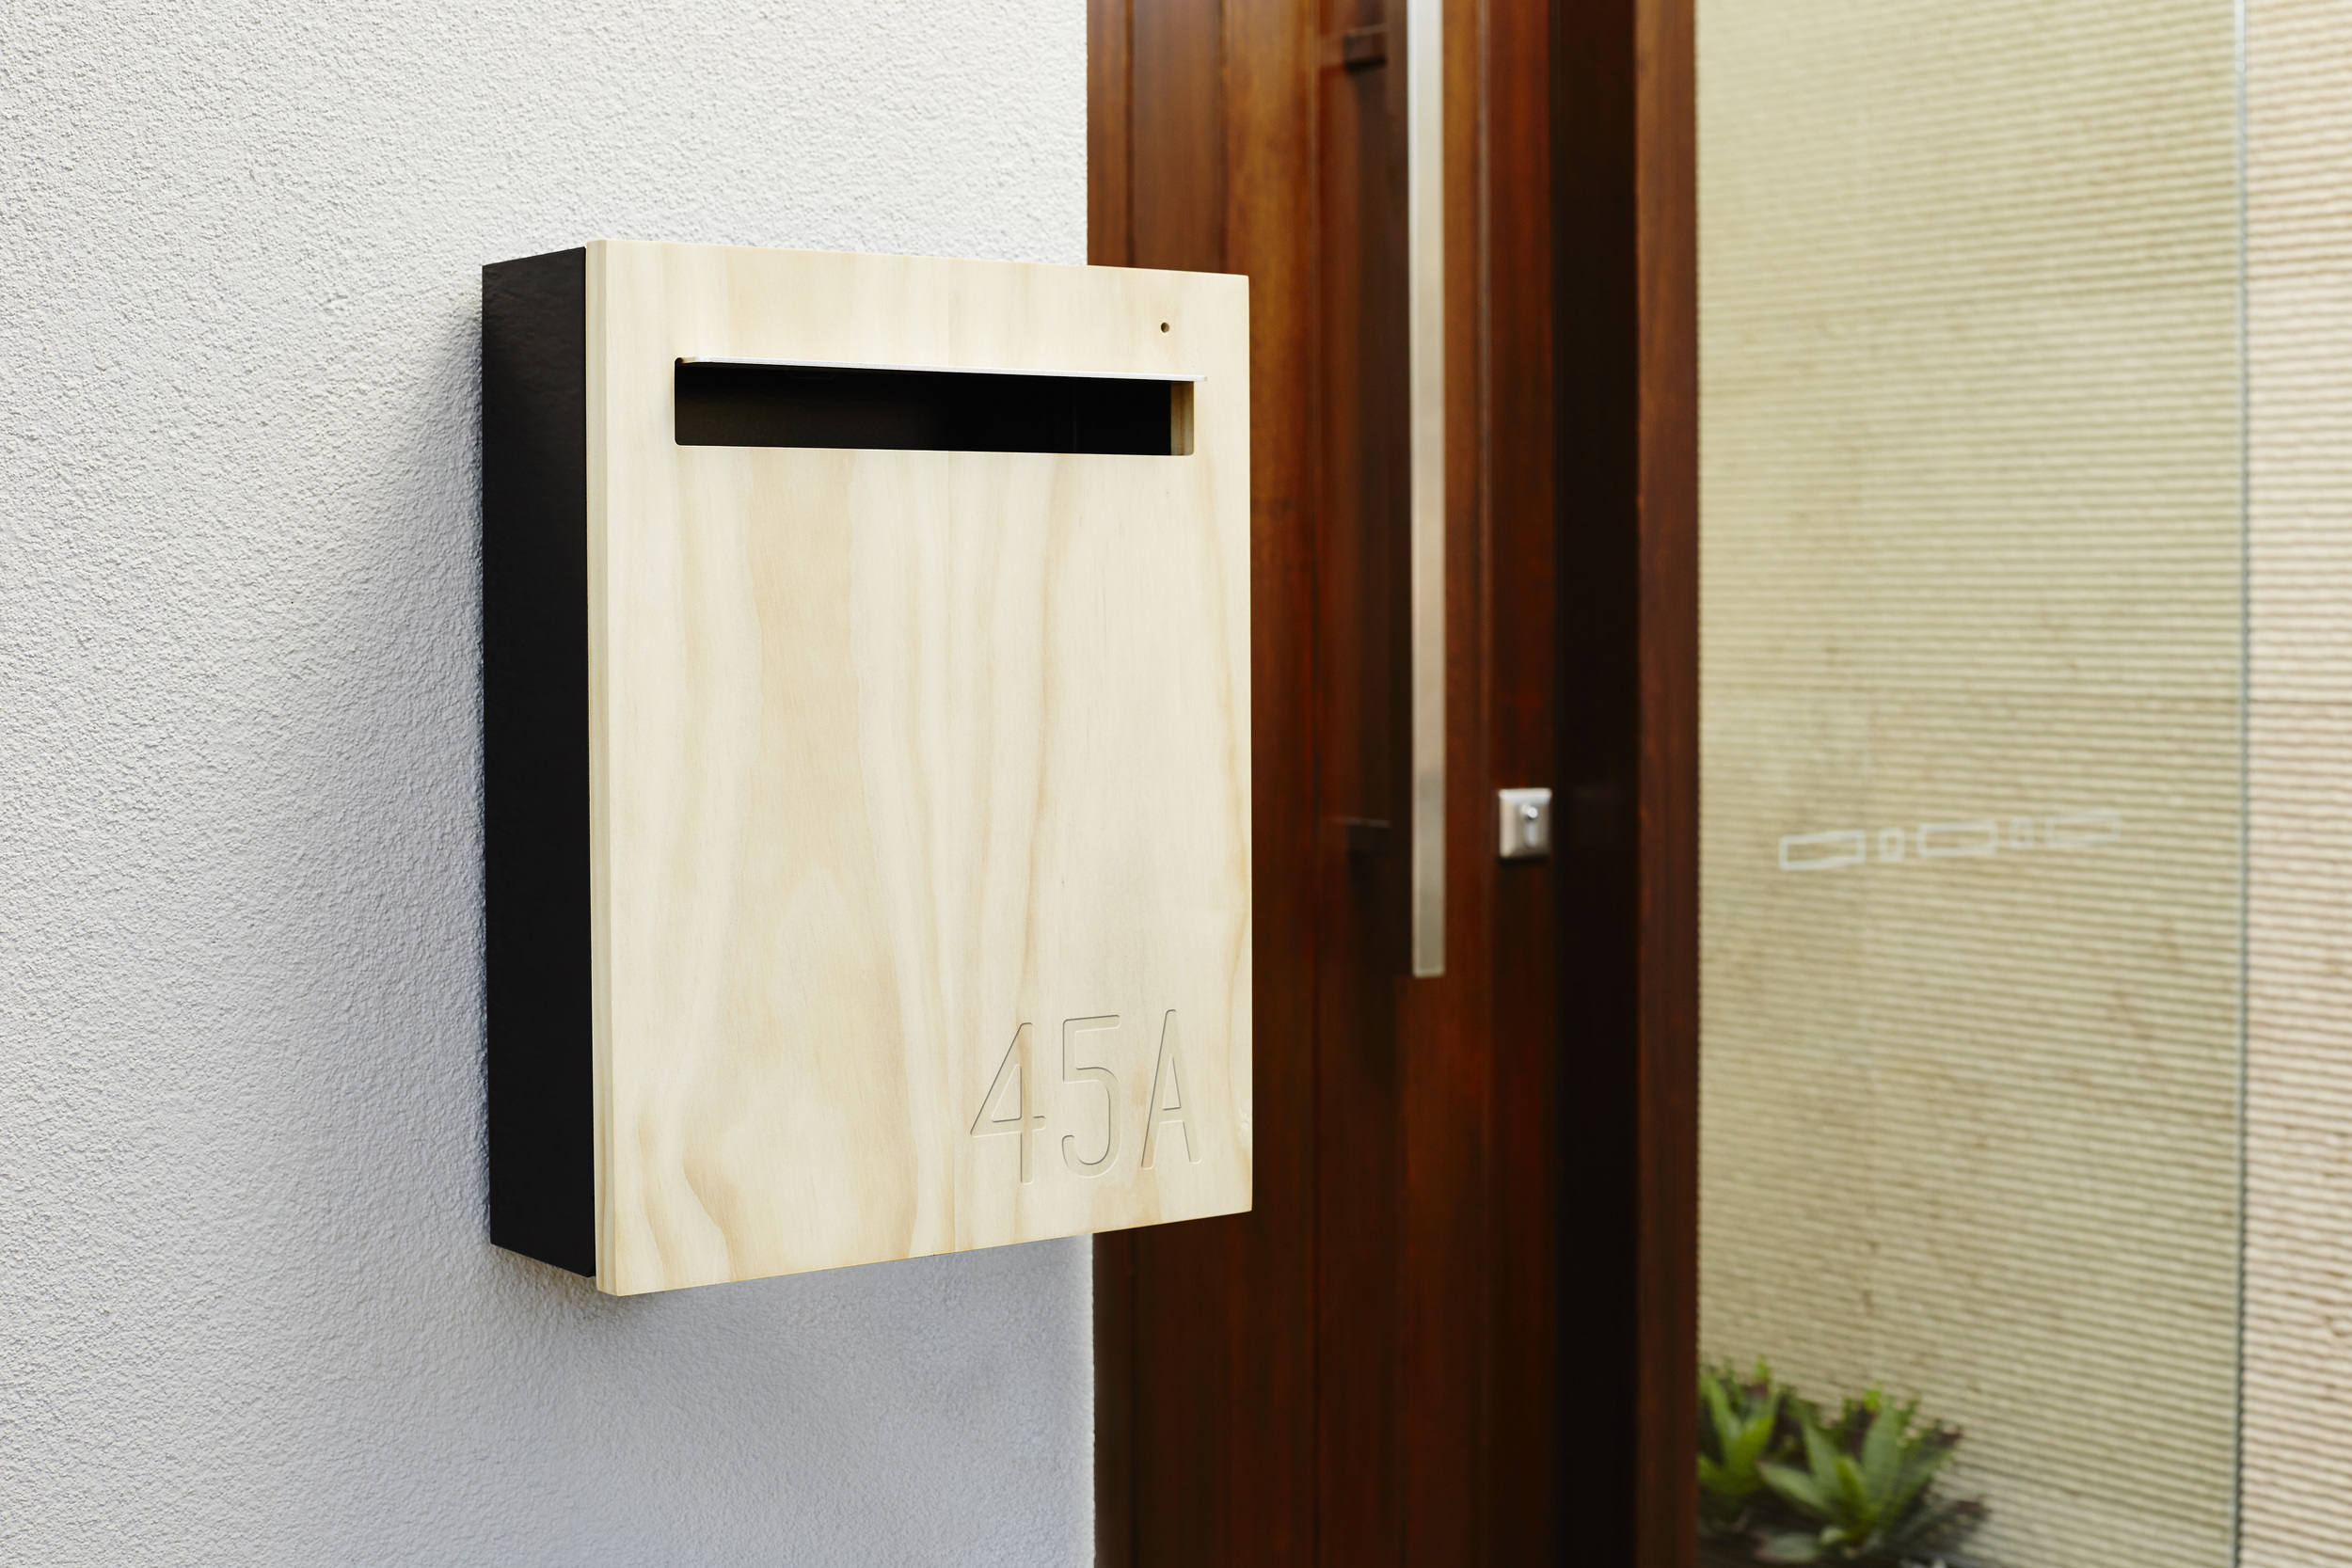 Wall Mounted Mailbox With Engraved Numbers